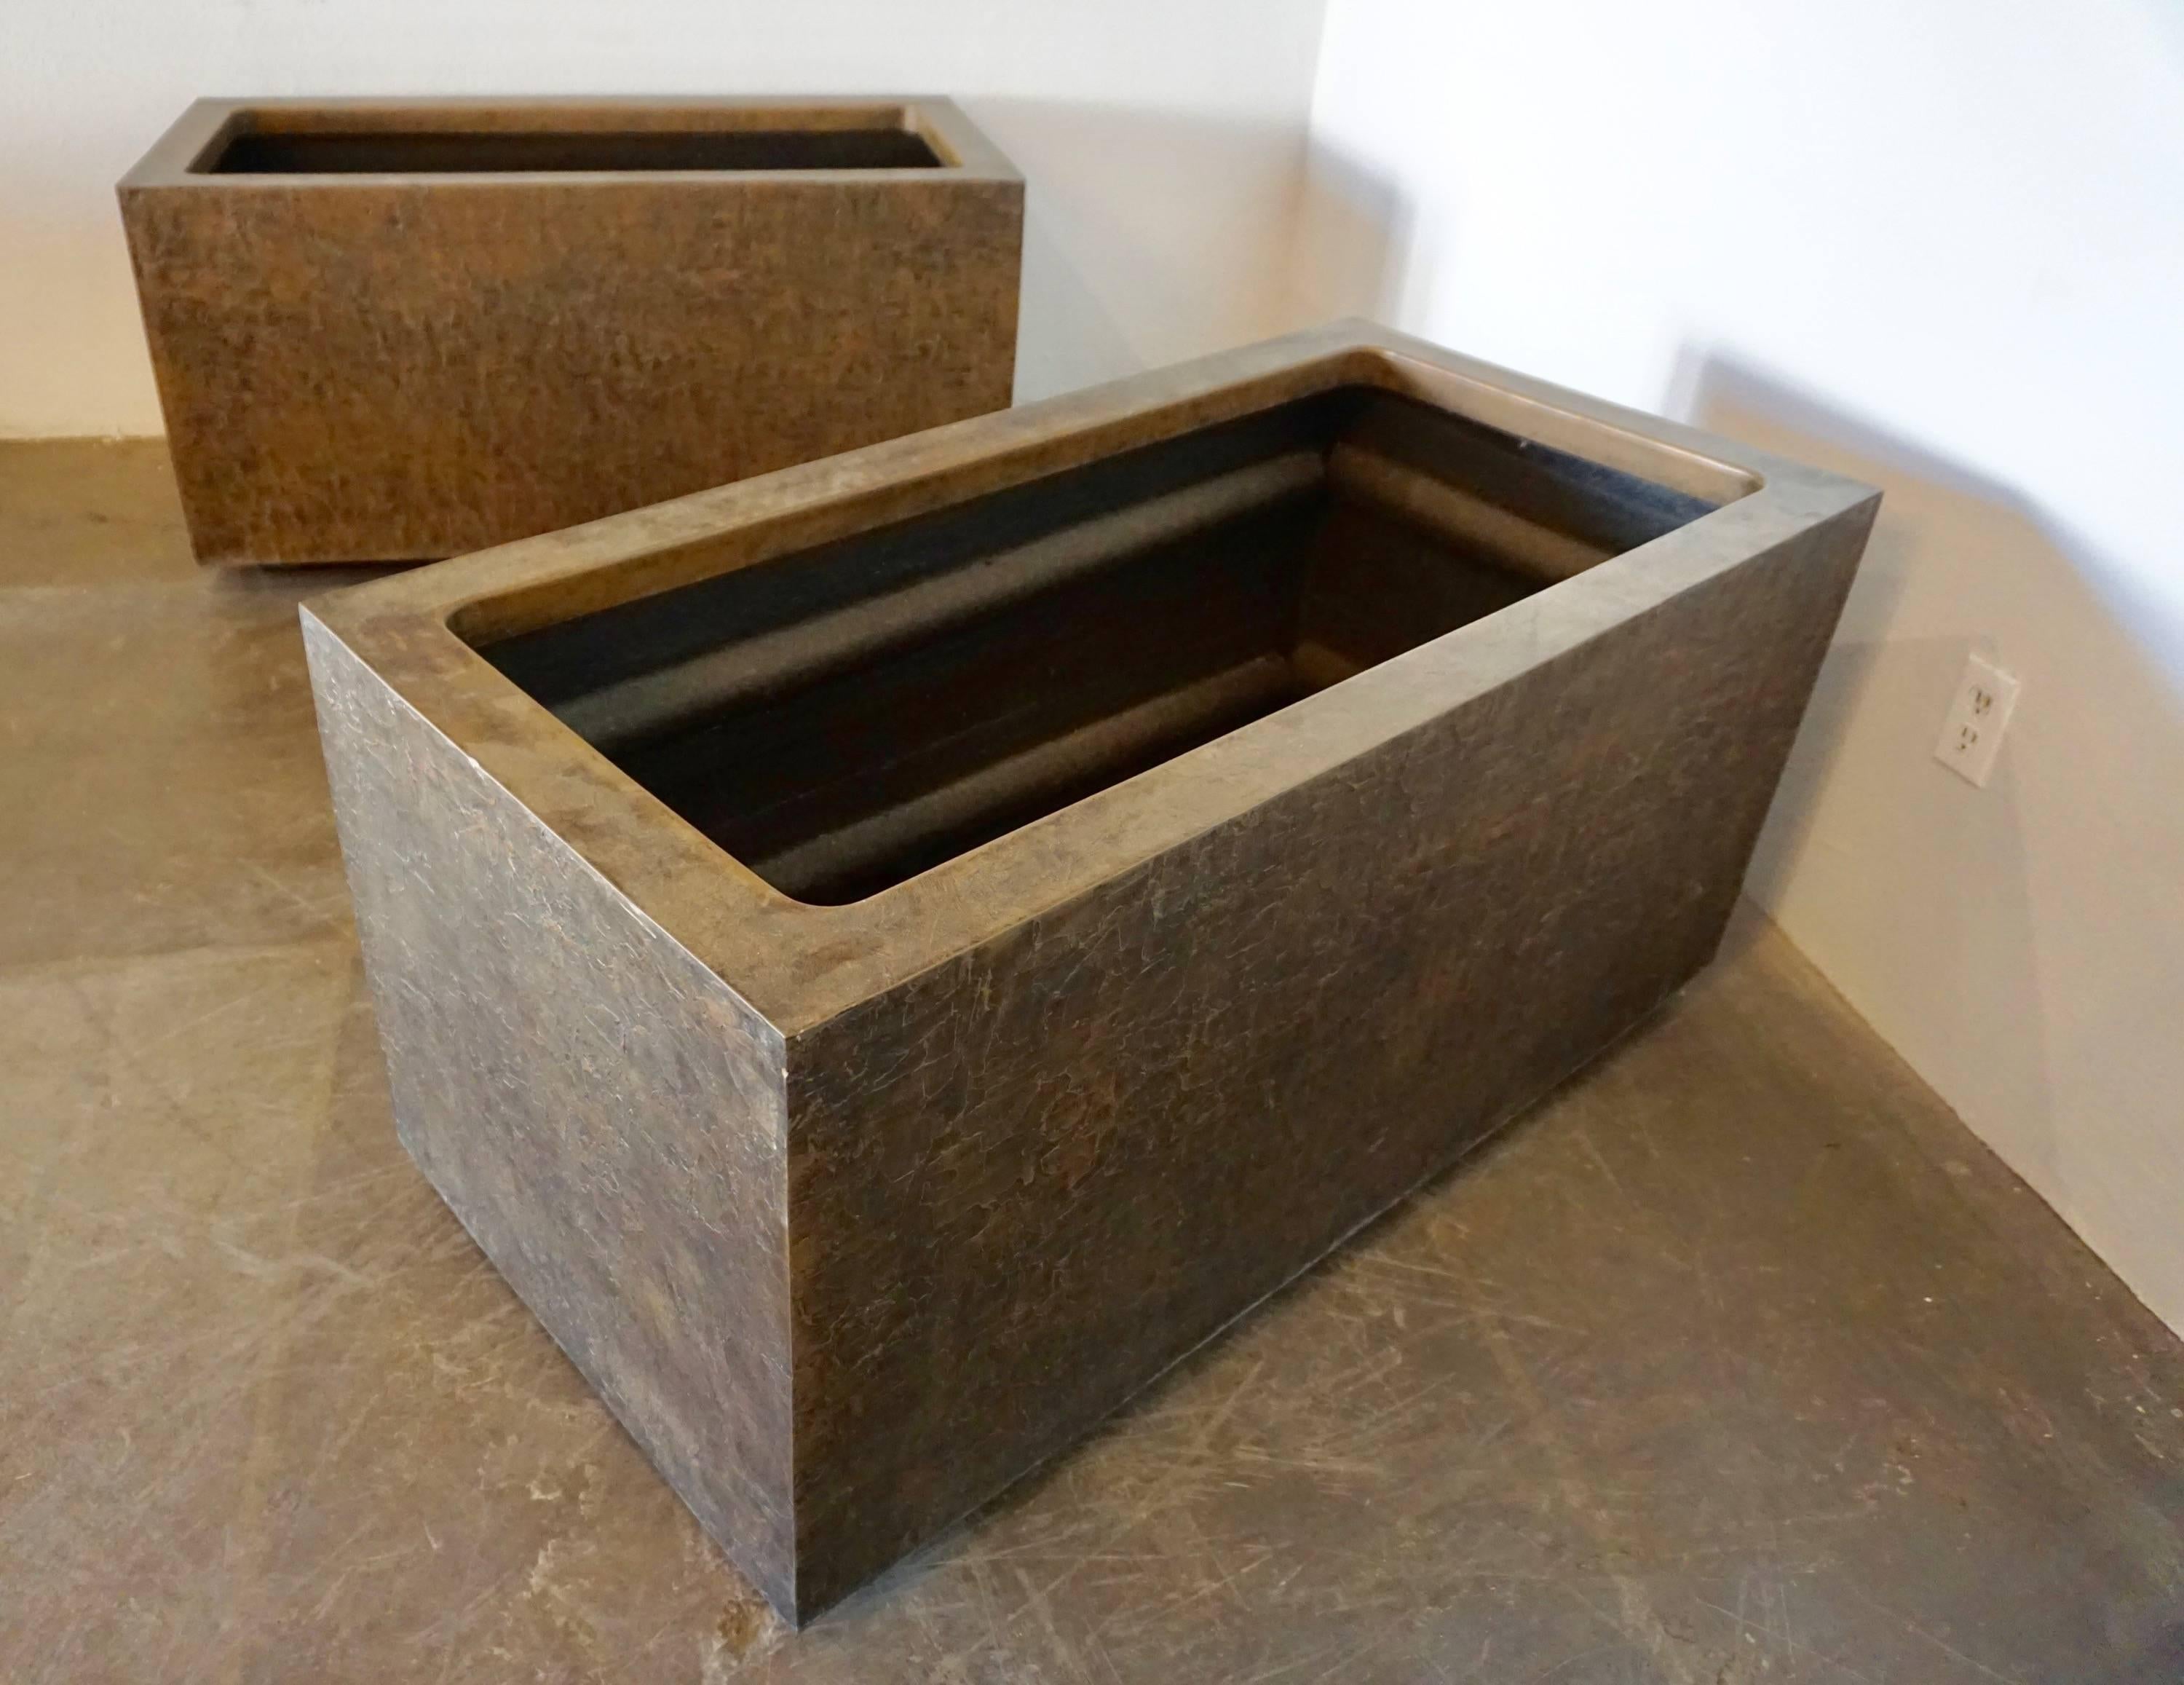 Pair of large, 1970s rectangular planters made by forms and surfaces, Santa Barbara, Ca. They are made of sturdy fiberglass inside with a beautiful Brutalist pattern of bonded bronze on the exterior. For indoor or outdoor use.